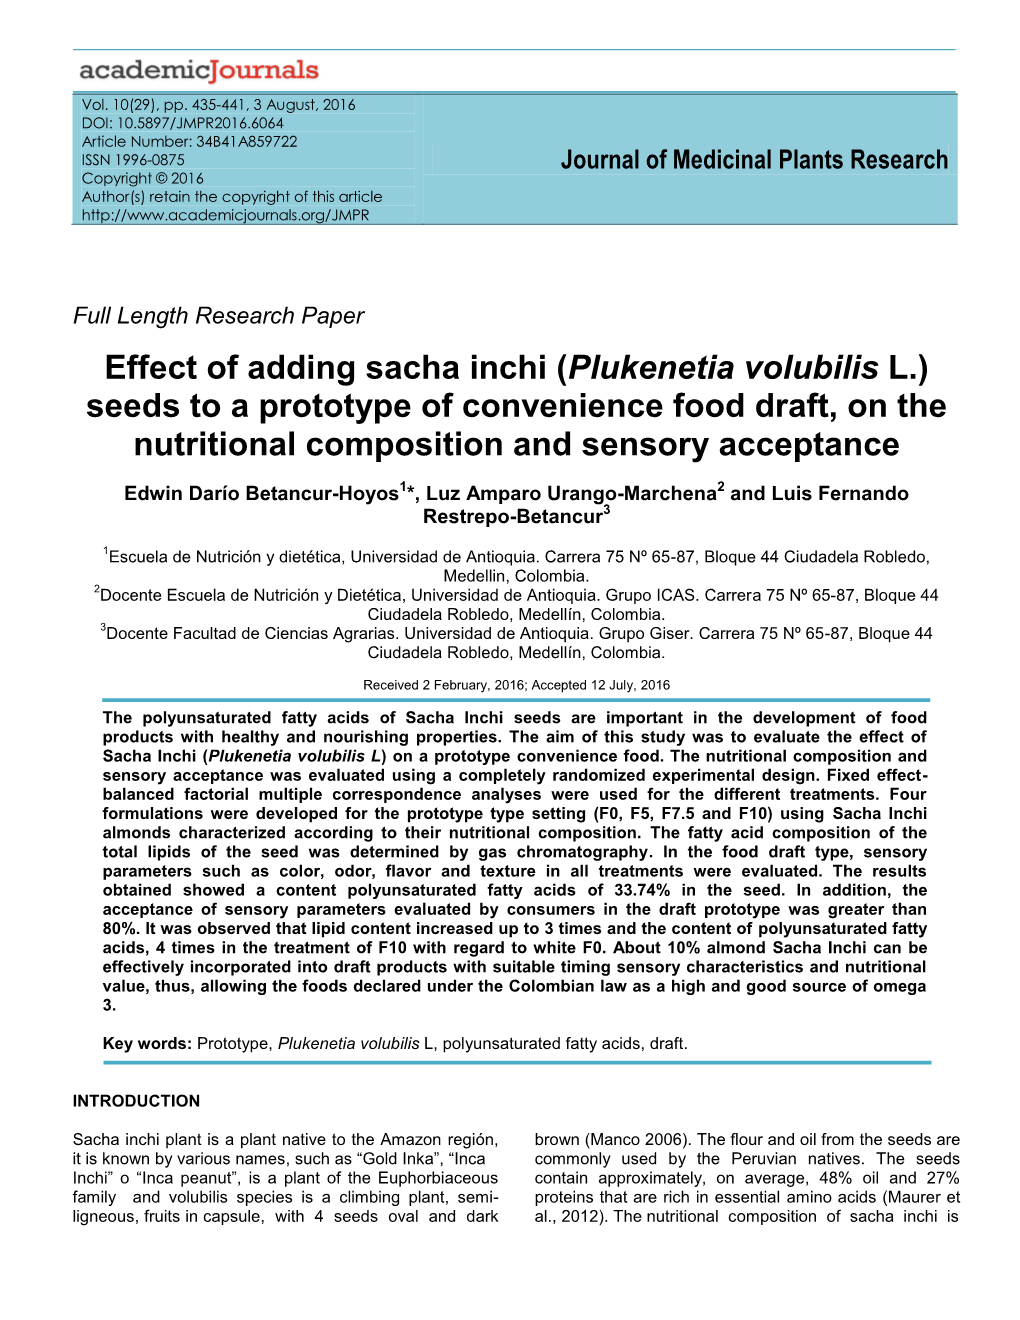 Effect of Adding Sacha Inchi (Plukenetia Volubilis L.) Seeds to a Prototype of Convenience Food Draft, on the Nutritional Composition and Sensory Acceptance